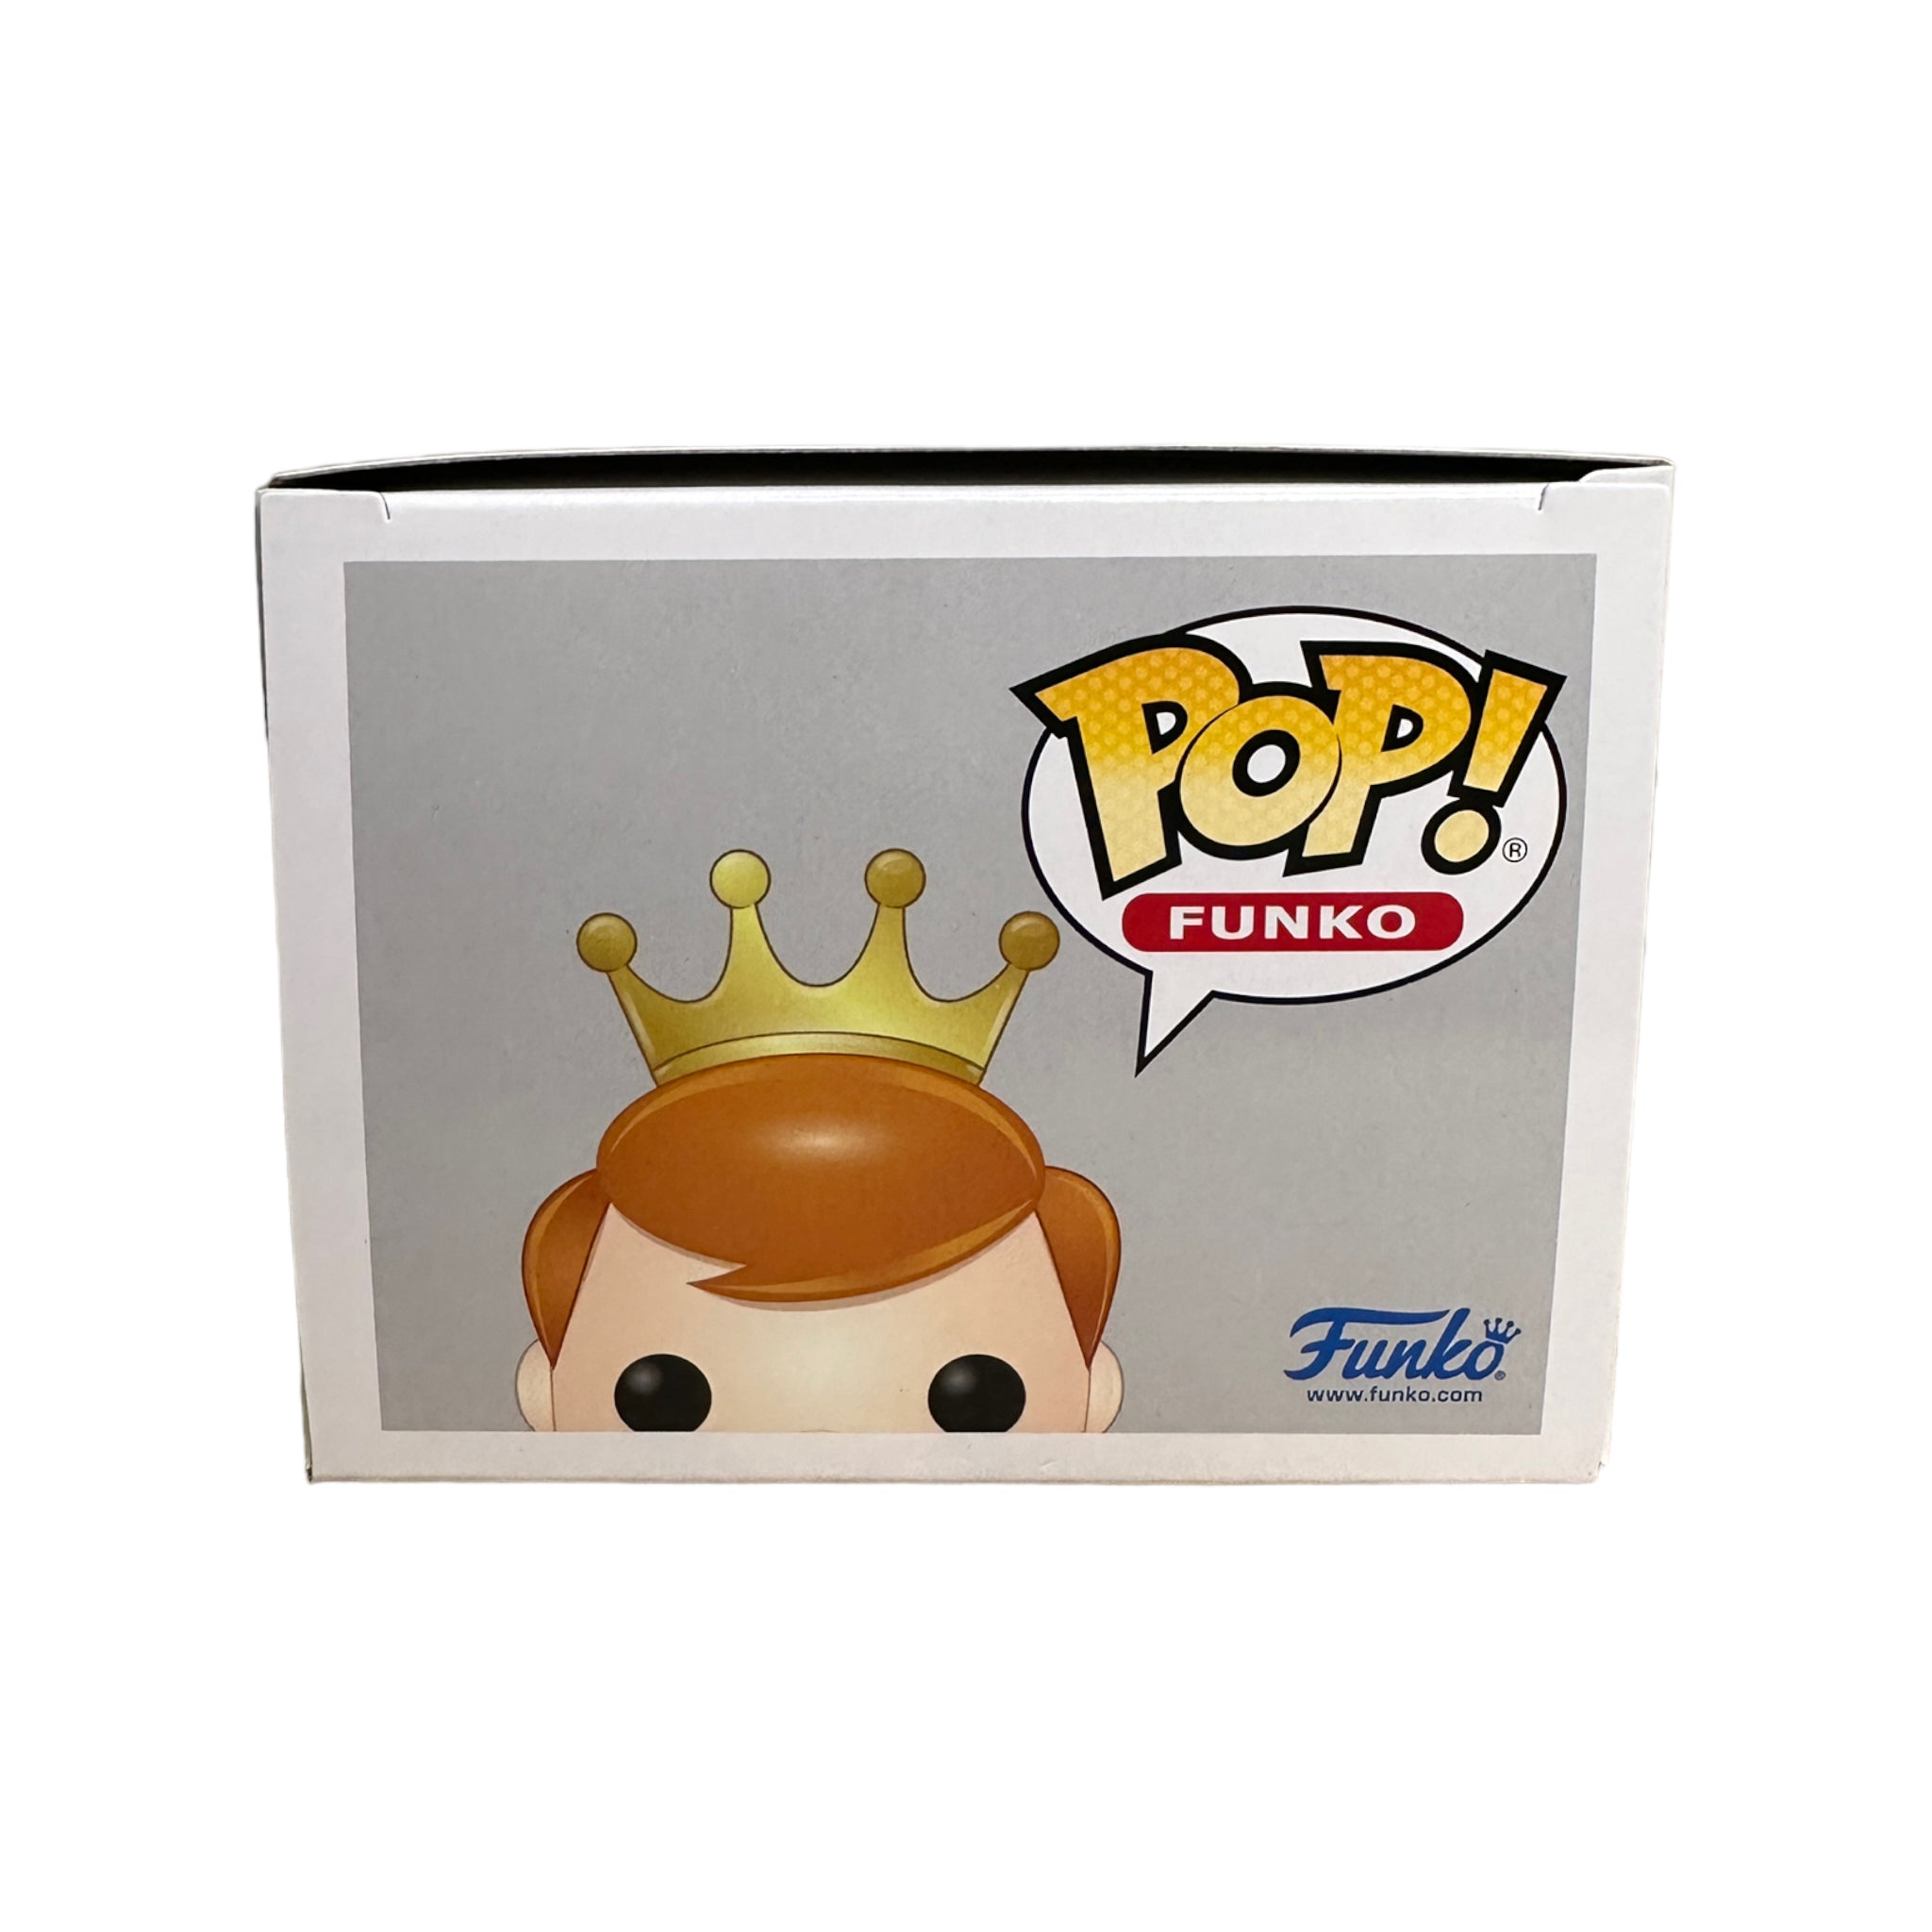 Freddy Funko as Russell Funko Pop! - Dug Days - SDCC 2022 Box of Fun Exclusive LE4000 Pcs - Condition 9.5/10